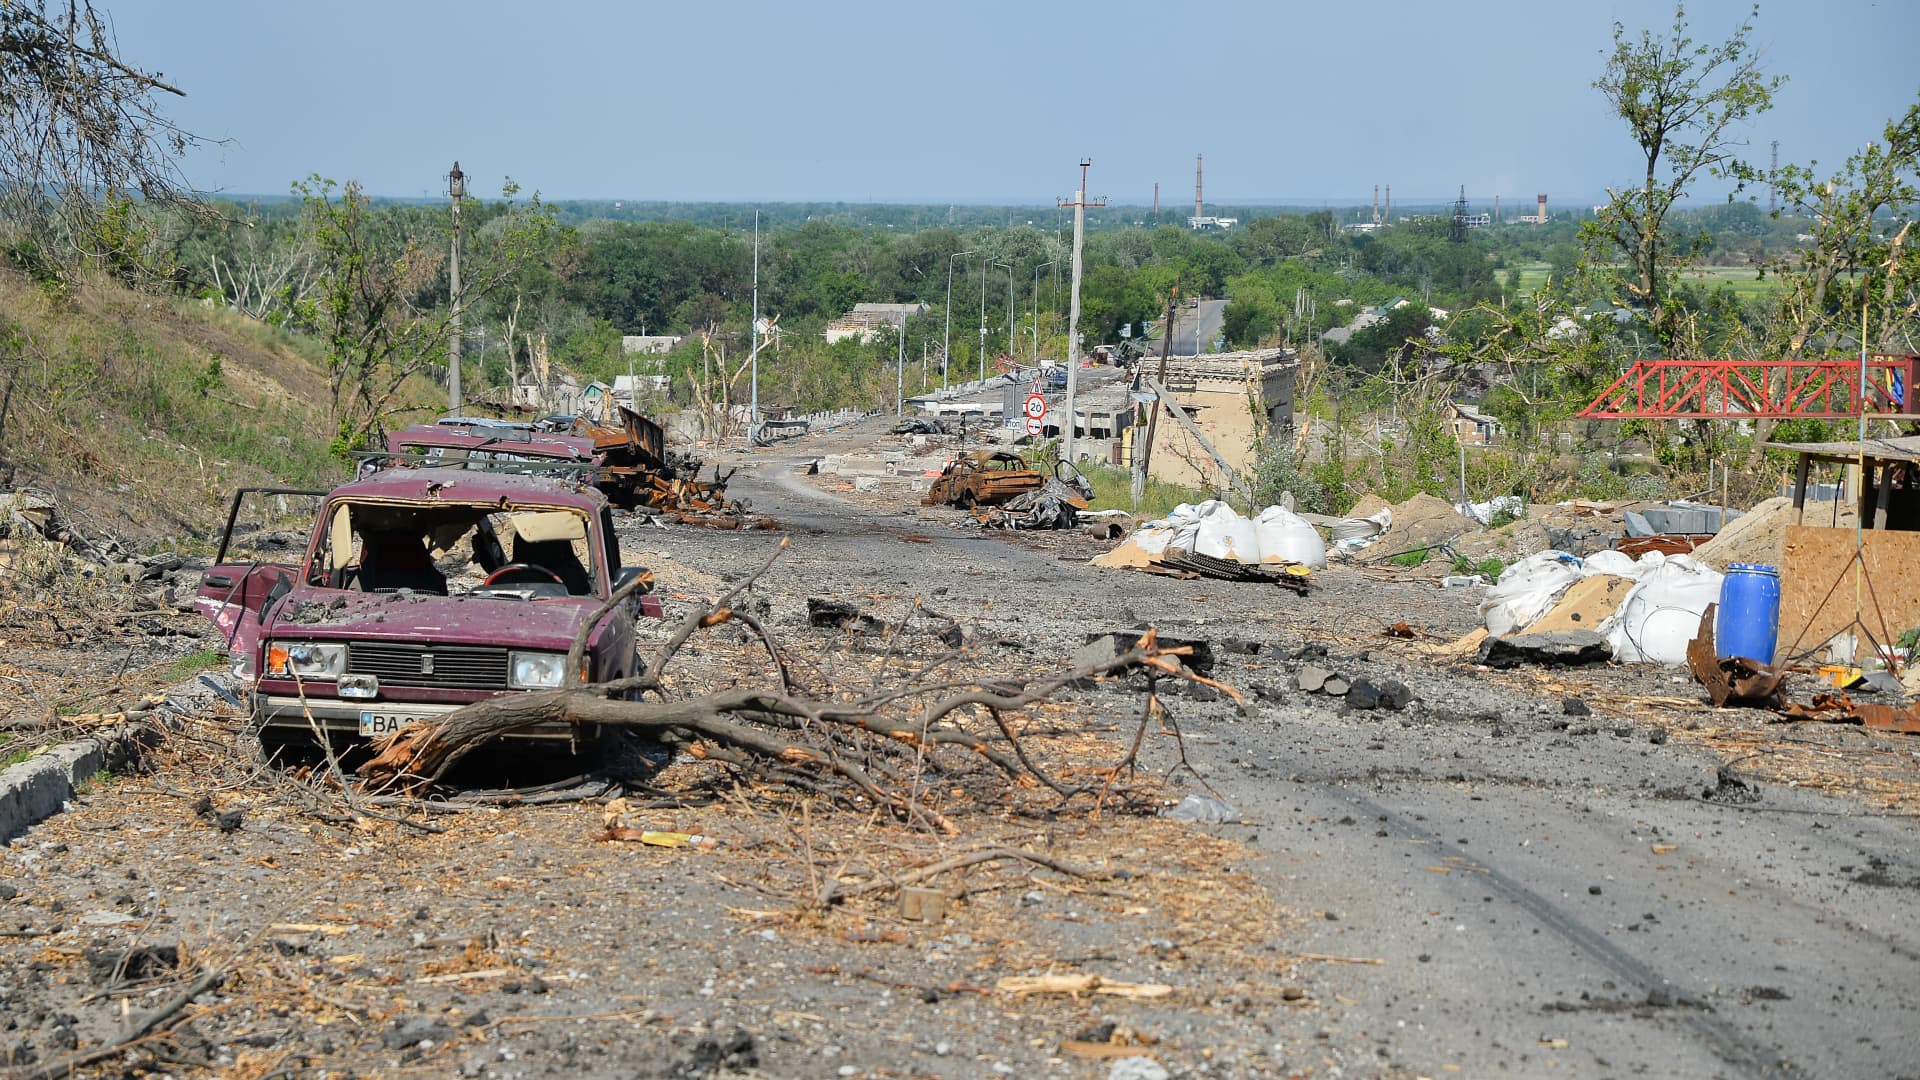 Debris and destroyed cars along a street in Lysychansk.